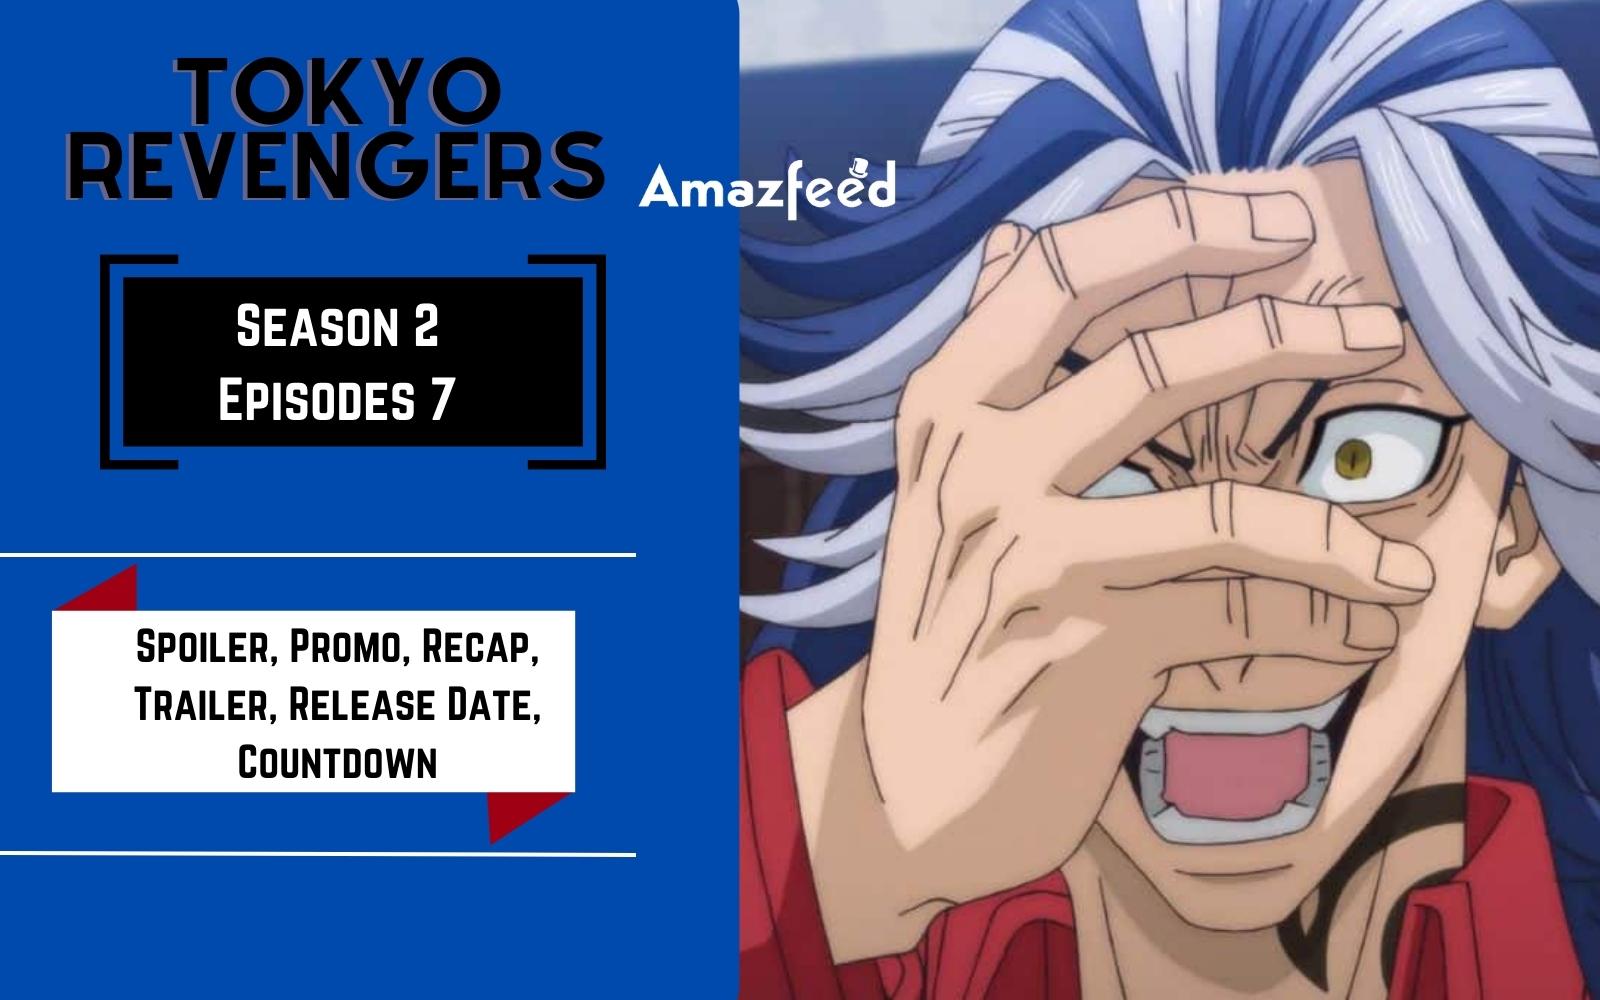 Tokyo Revengers Season 2 Episode 7 Review: Only Redeeming Quality